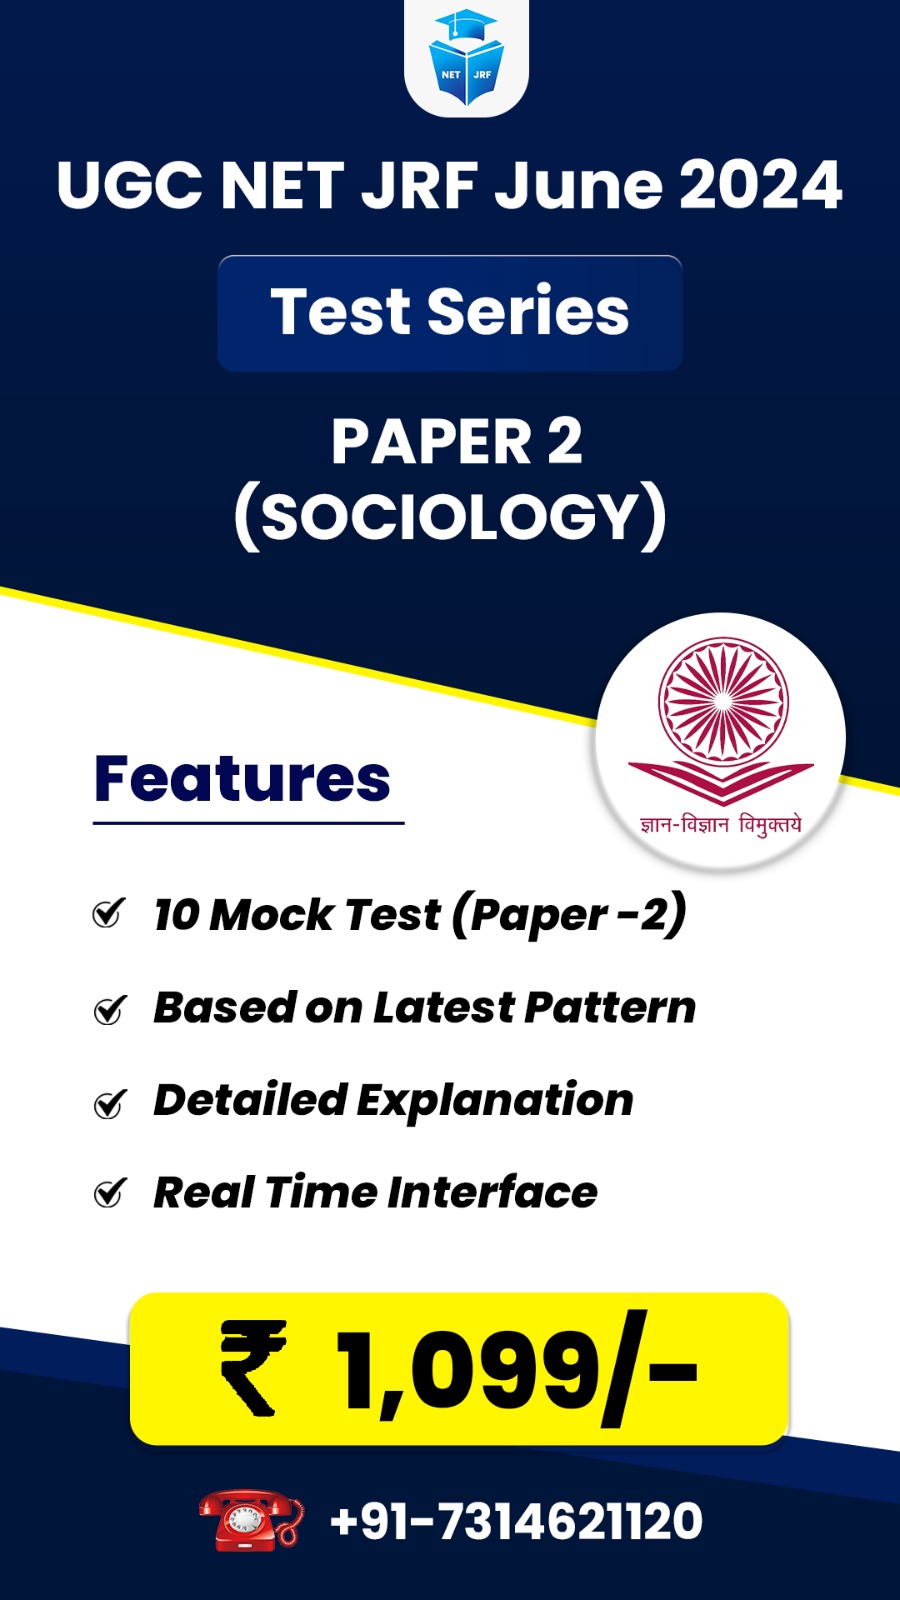 Sociology  (Paper 2) Test Series for June 2024